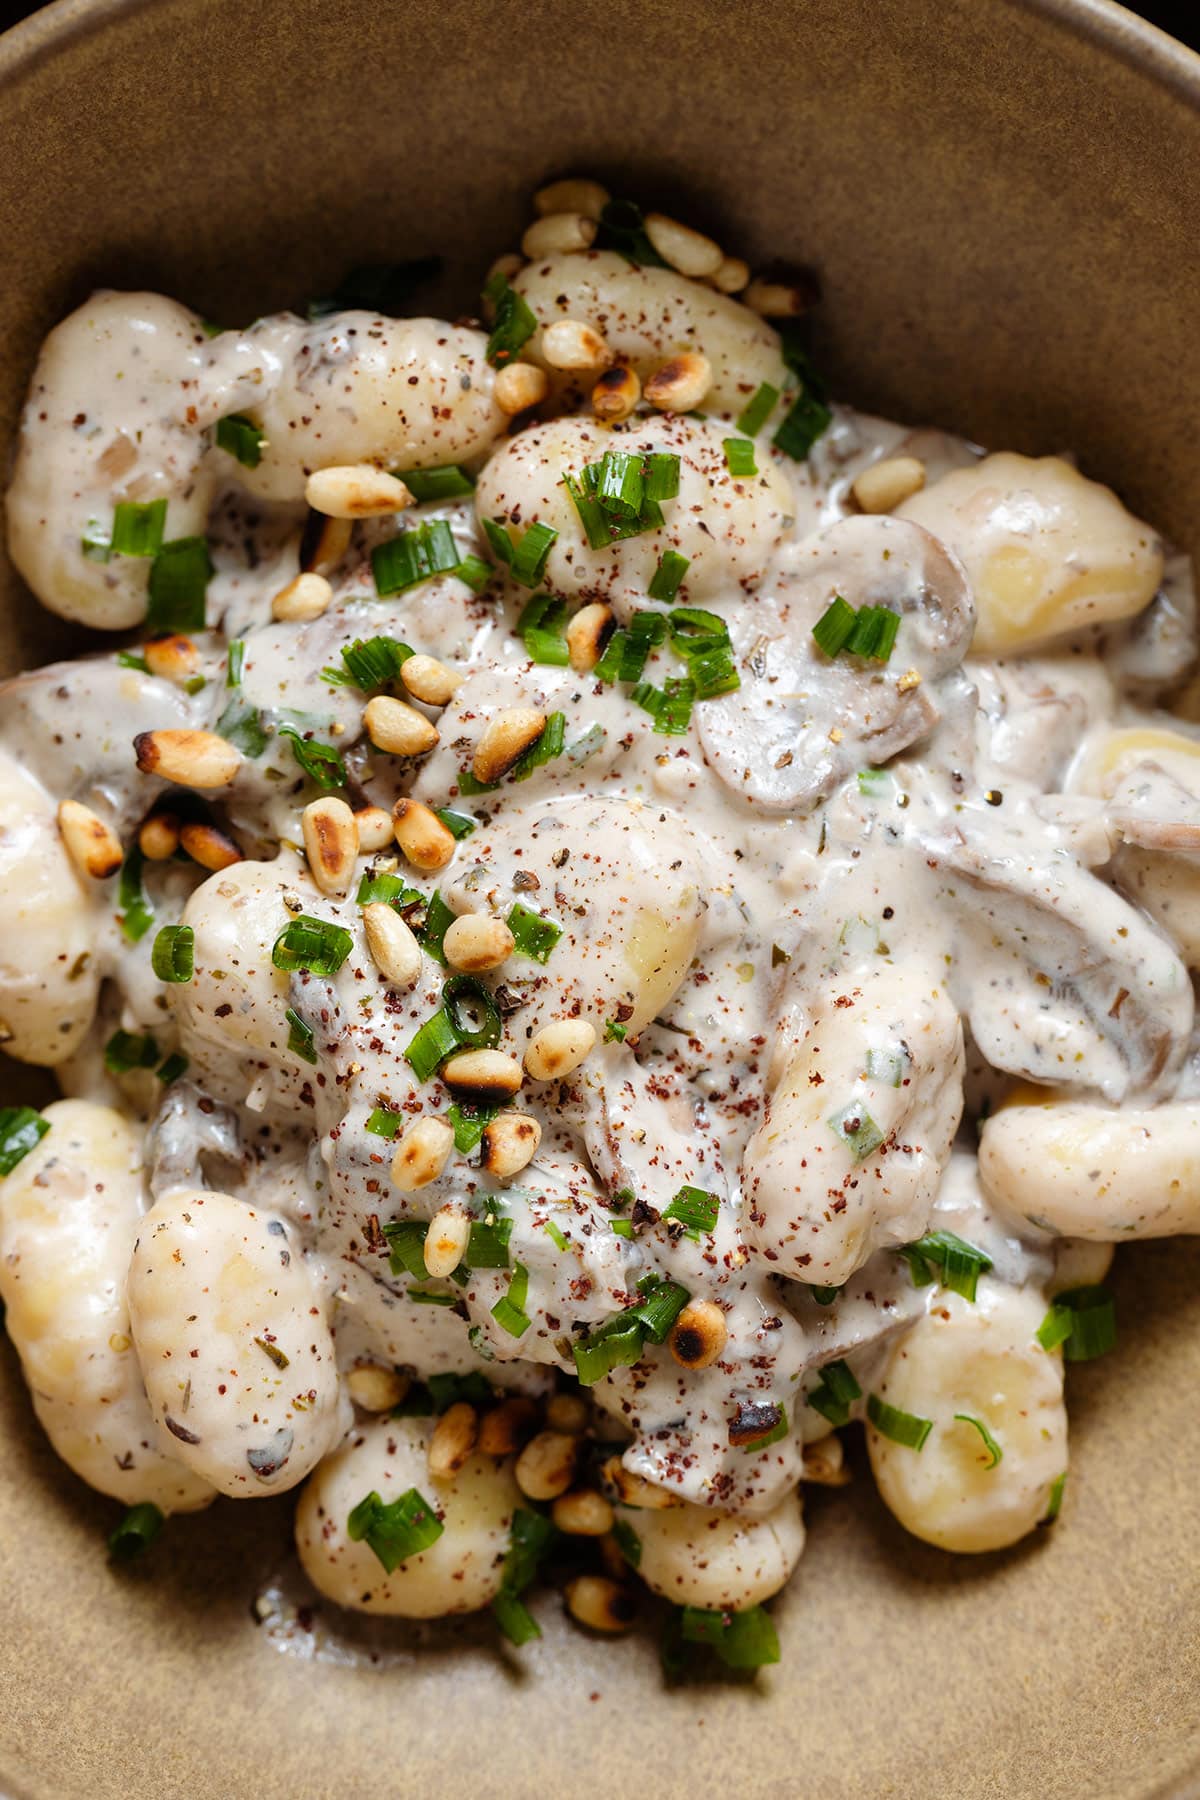 Creamy gnocchi with mushroom in a brown bowl topped with toasted pine nuts, chives, and sumac.